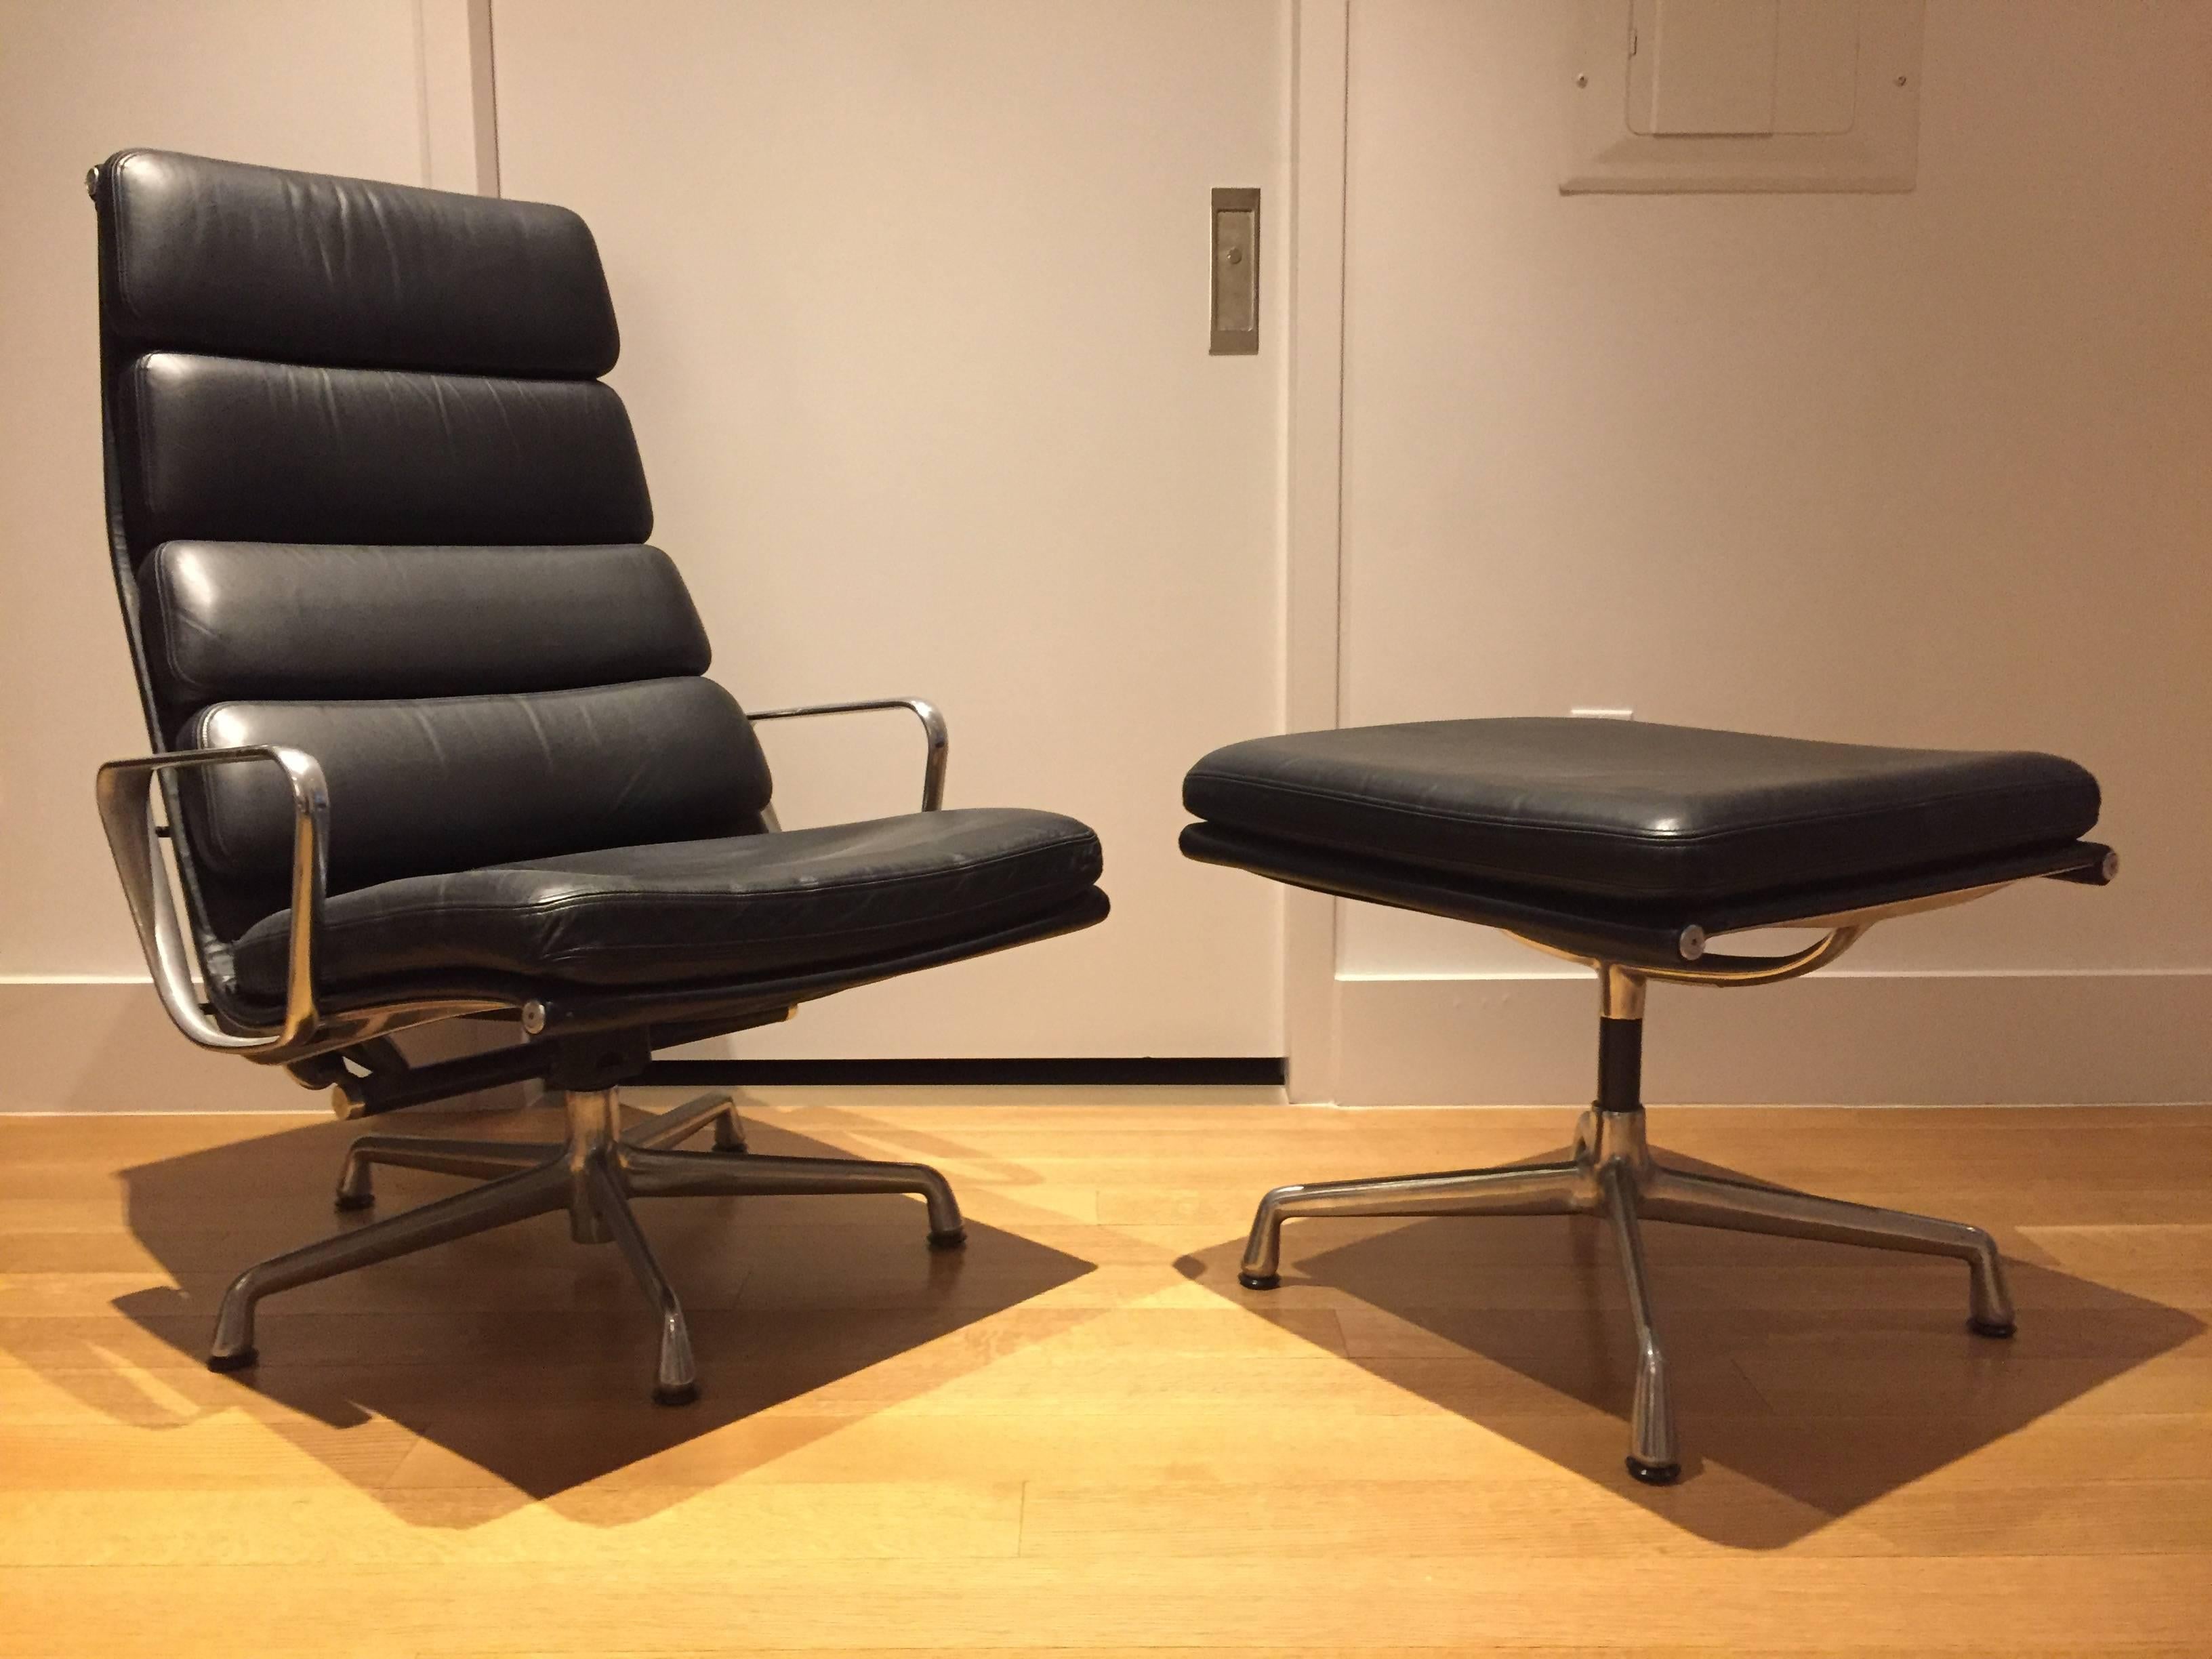 Herman Miller Eames aluminium group soft pad lounge chair and ottoman. Approximately 12 years old. In excellent vintage condition with minor mark on armrest and scuff to side of ottoman (pictured). Leather in excellent condition with no cracks or